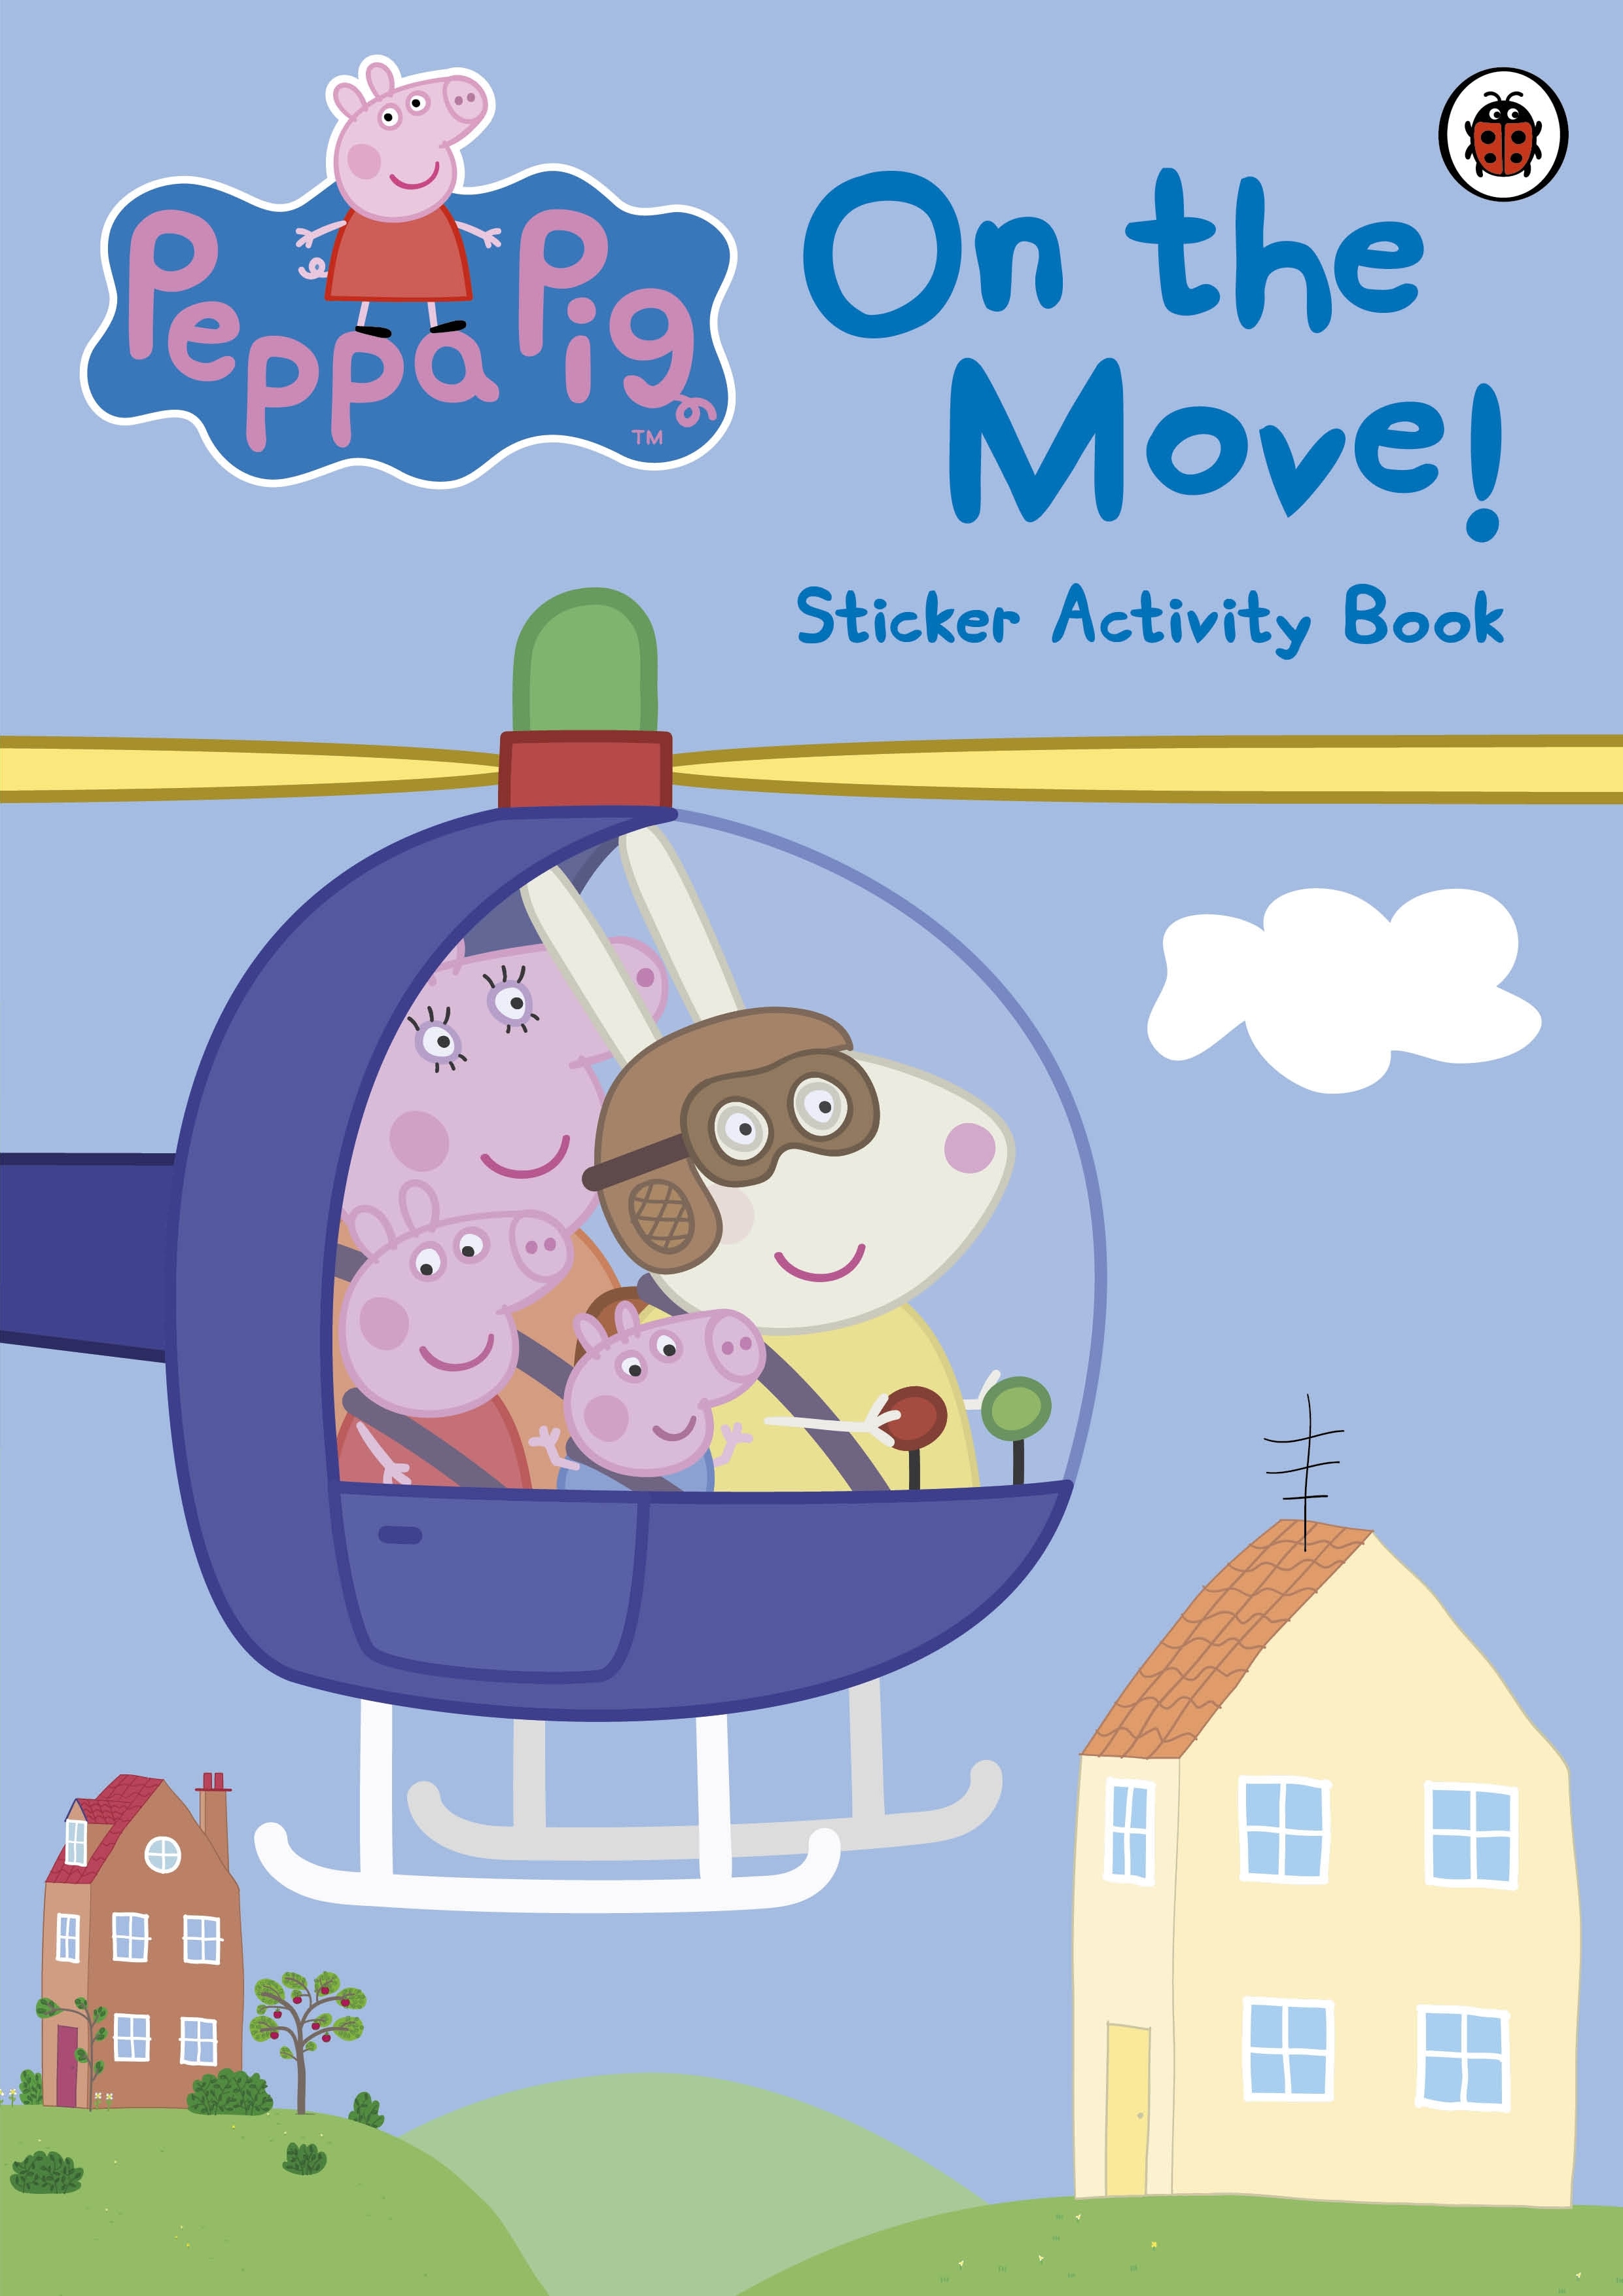 Book “Peppa Pig: On the Move! Sticker Activity Book” by Peppa Pig — March 7, 2013